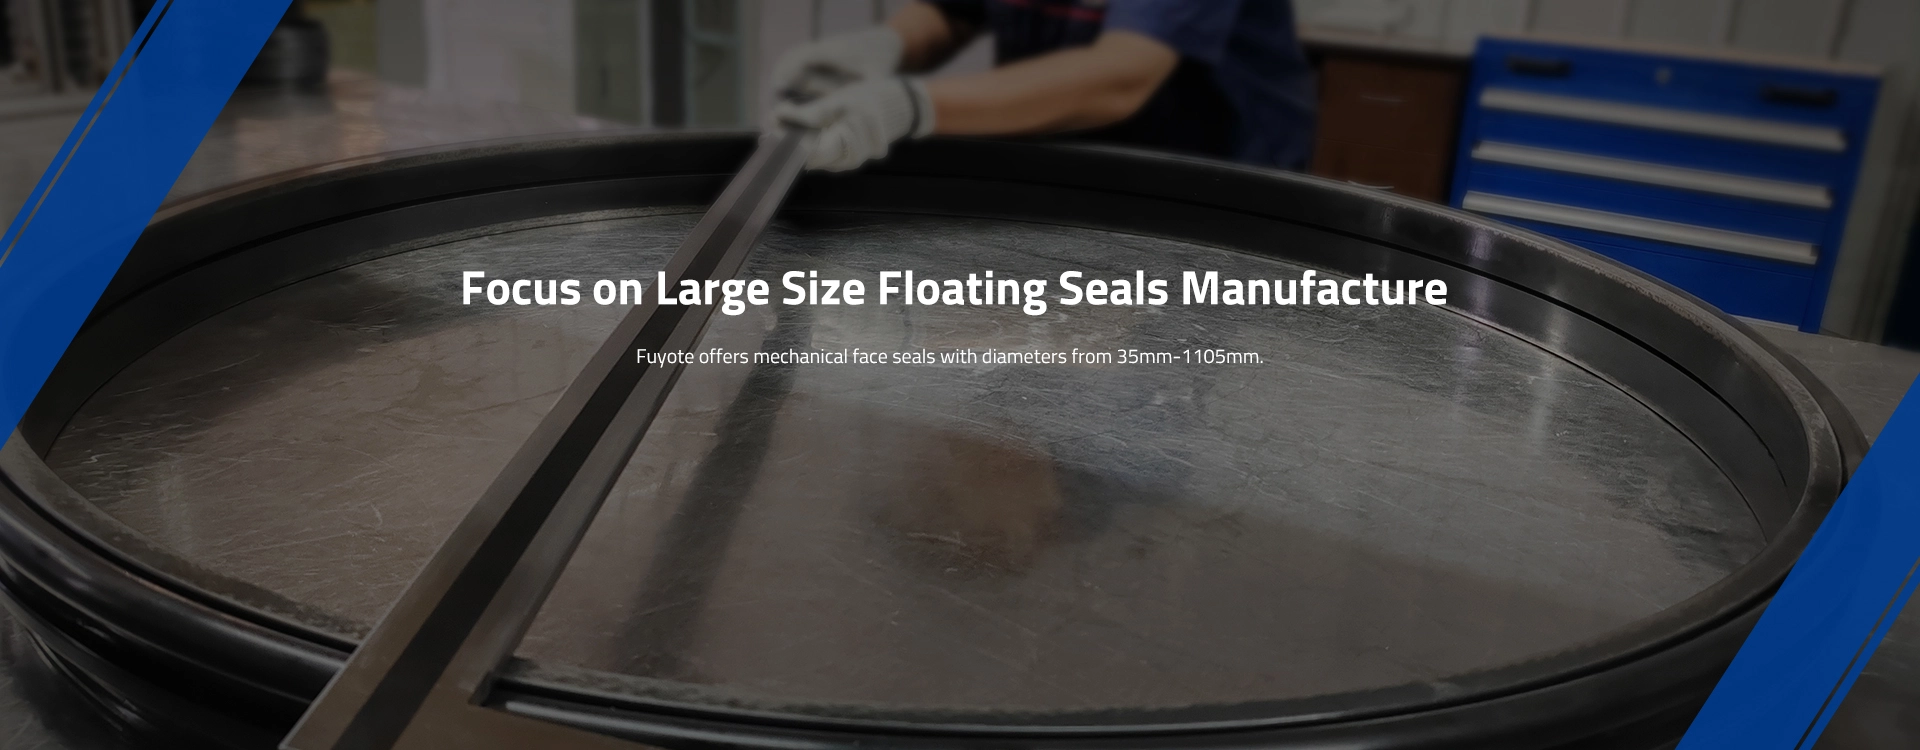 Focus on Large Size Floating Seals Manufacture